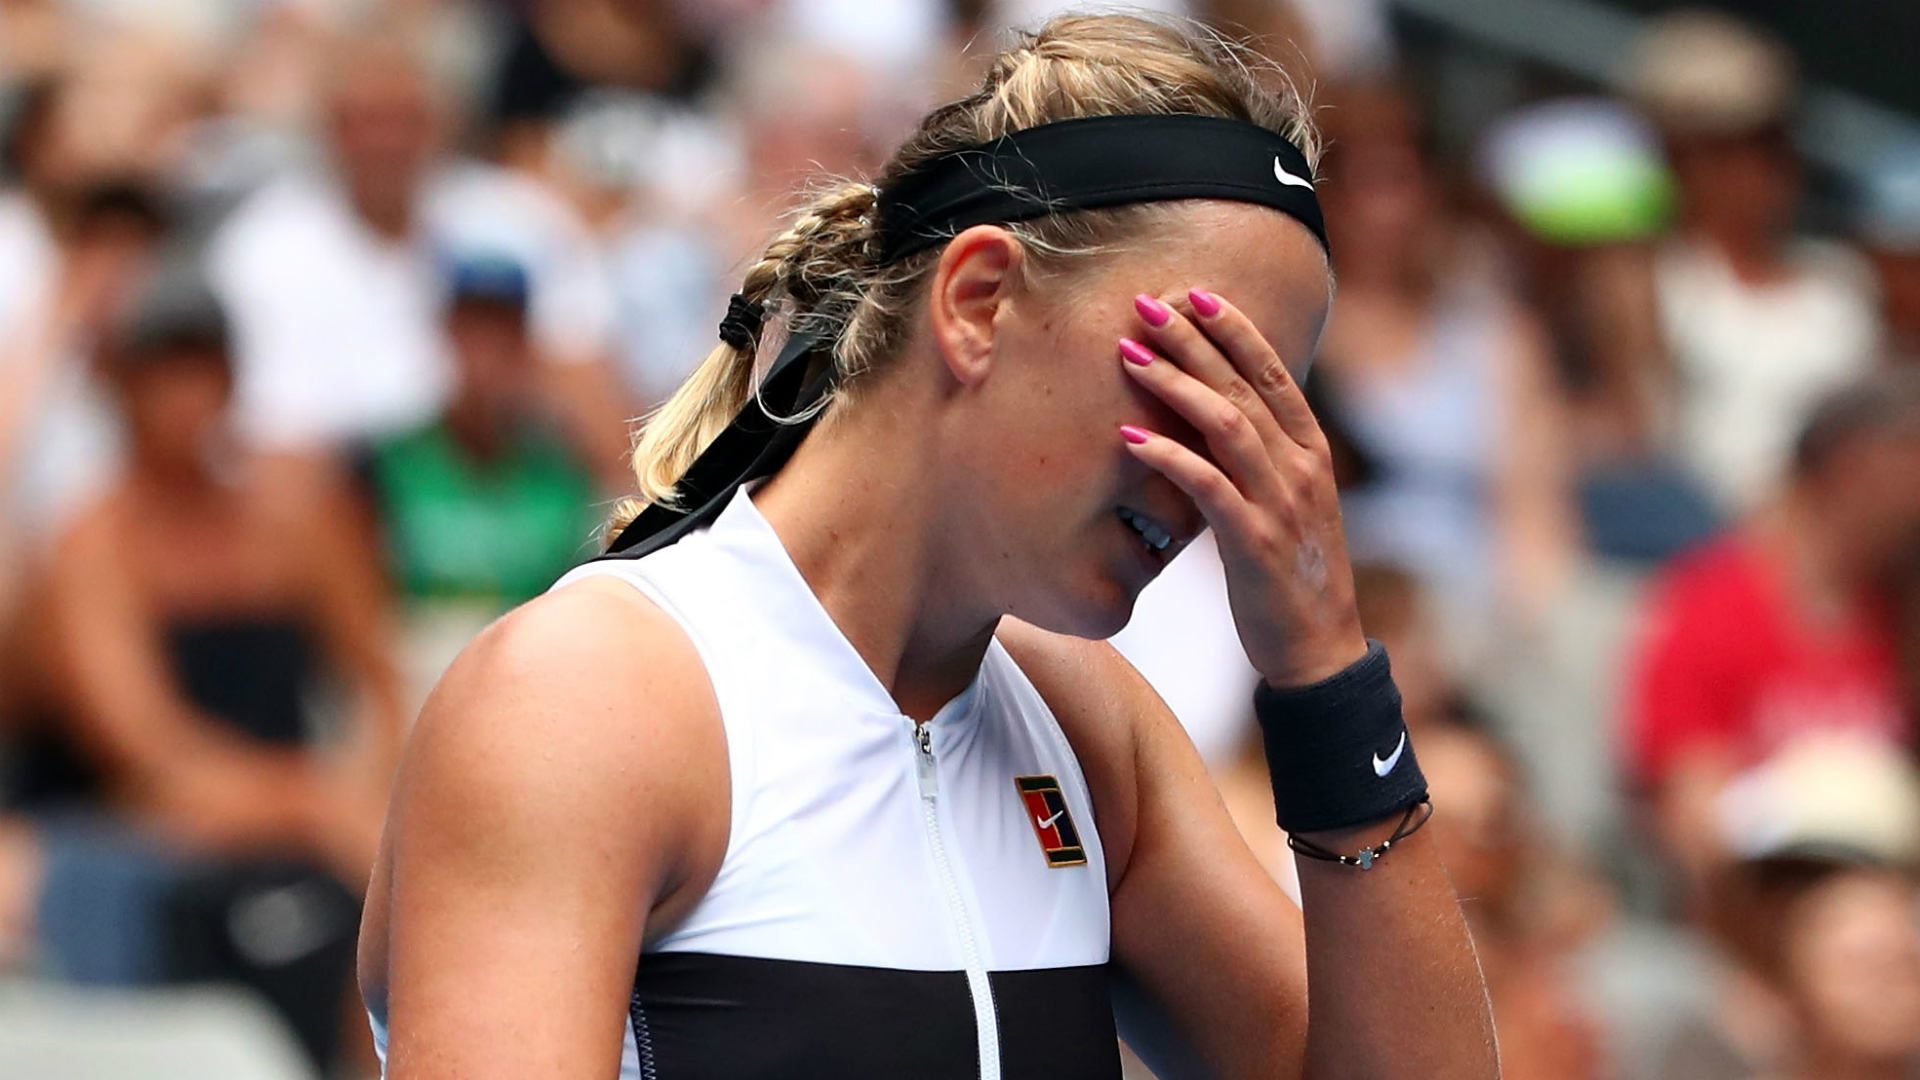 Victoria Azarenka made her first Australian Open appearance since 2016, though it ended in an opening-round defeat on Tuesday.